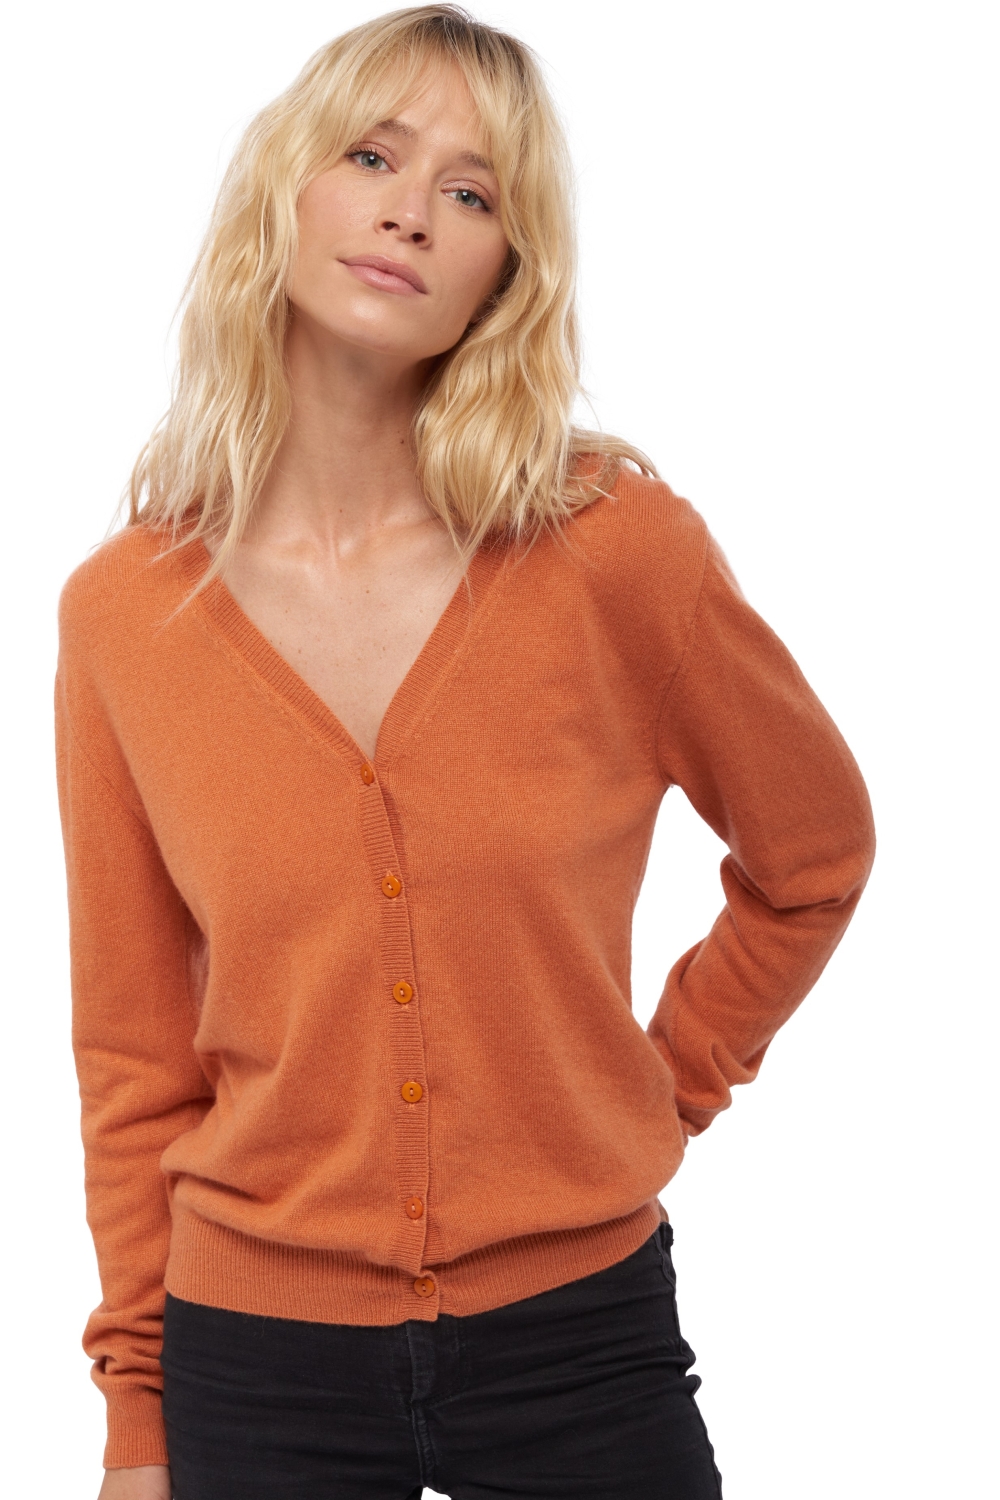 Cashmere ladies basic sweaters at low prices taline first butternut xs